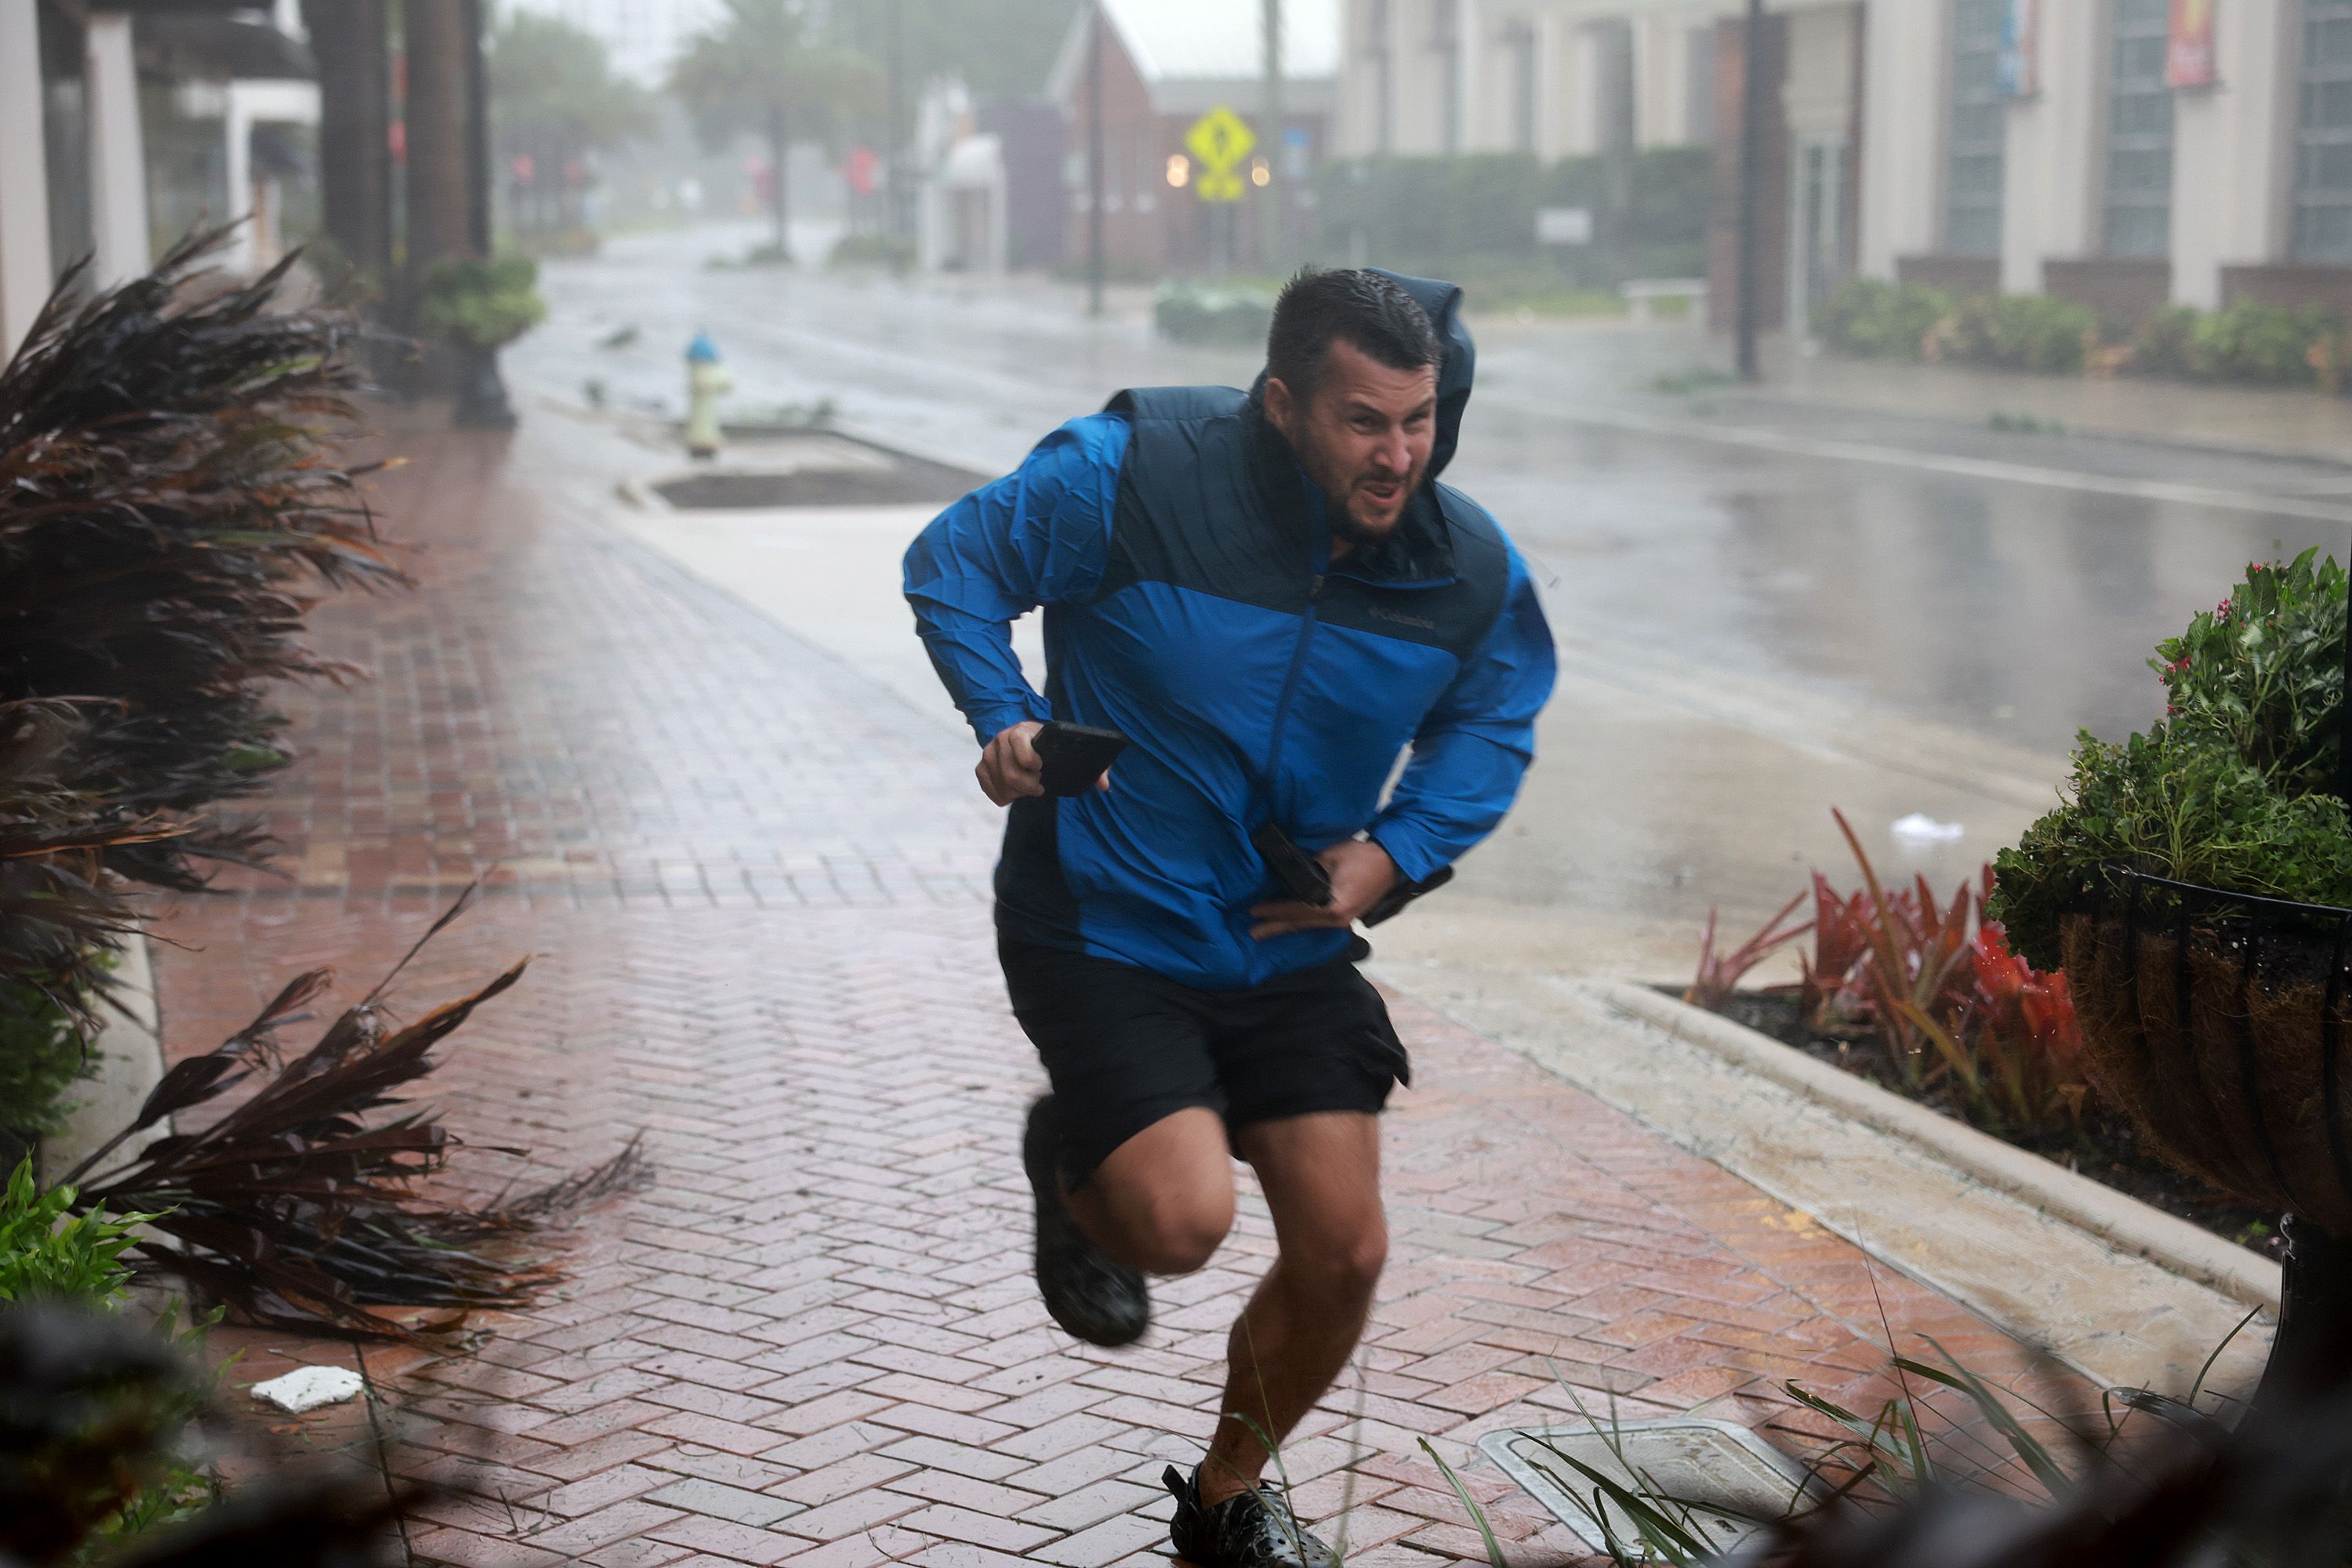 A man runs to a sheltered spot through the wind and rain from Hurricane Ian on September 28, 2022 in Sarasota, Florida.